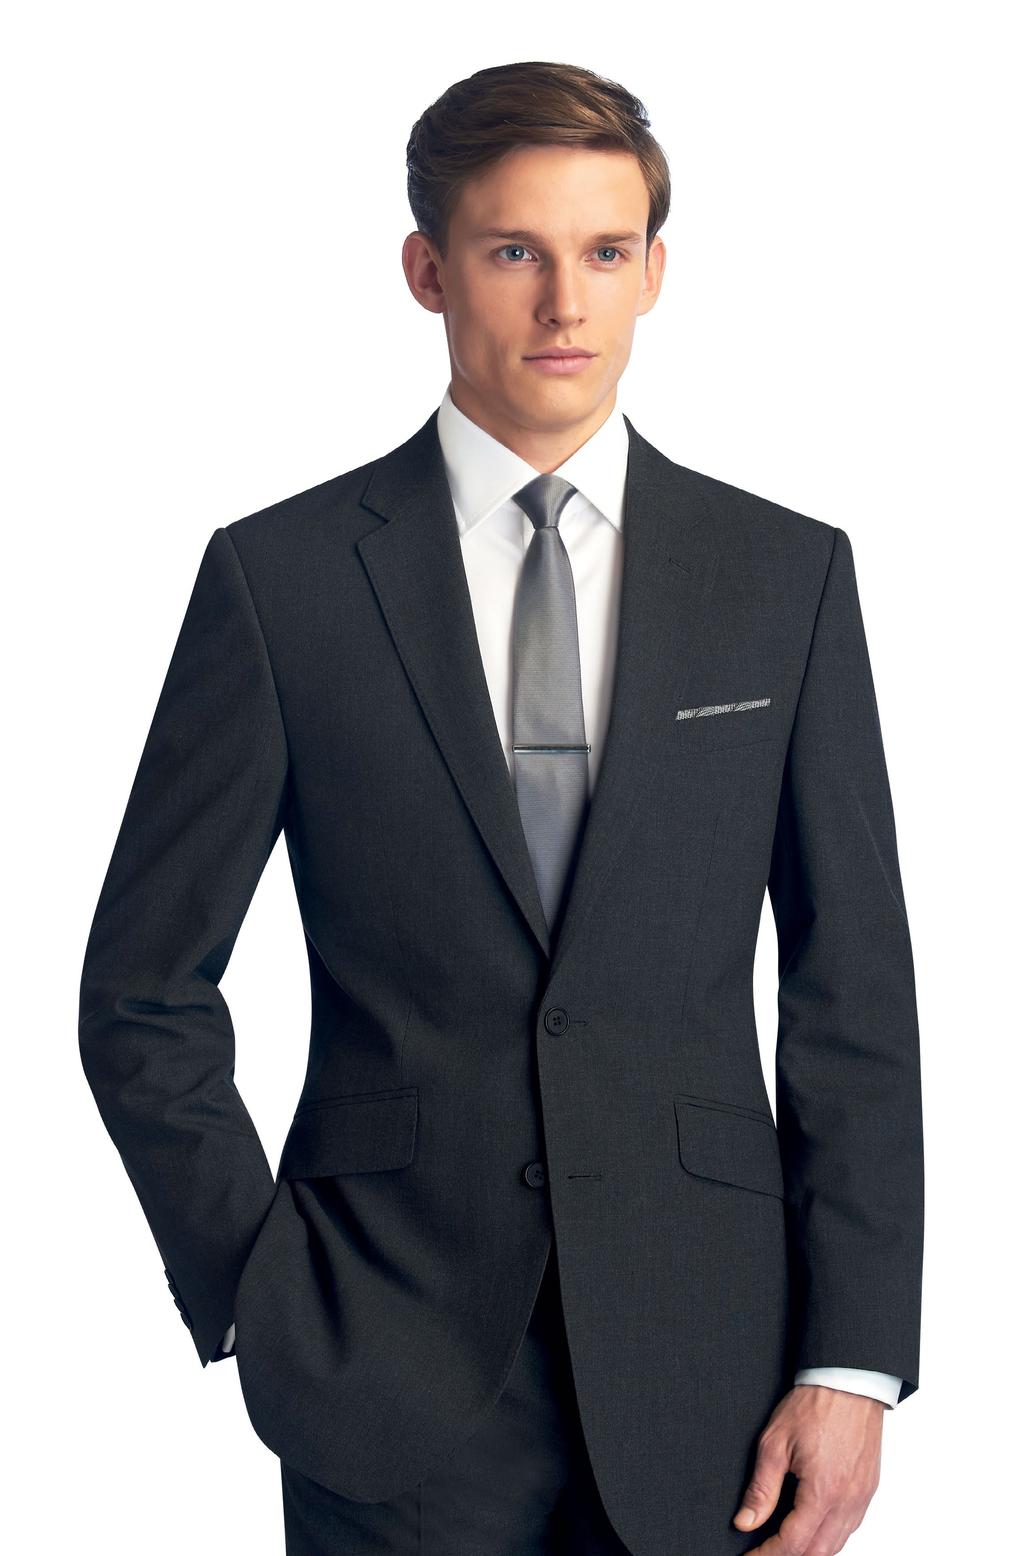 CORPORATE CLOTHING A COLLECTION OF TAILORED CLOTHING DESIGNED FOR WORK If you are in the market for tailored clothing for work you will come across all kinds of claims and boasts in other brochures